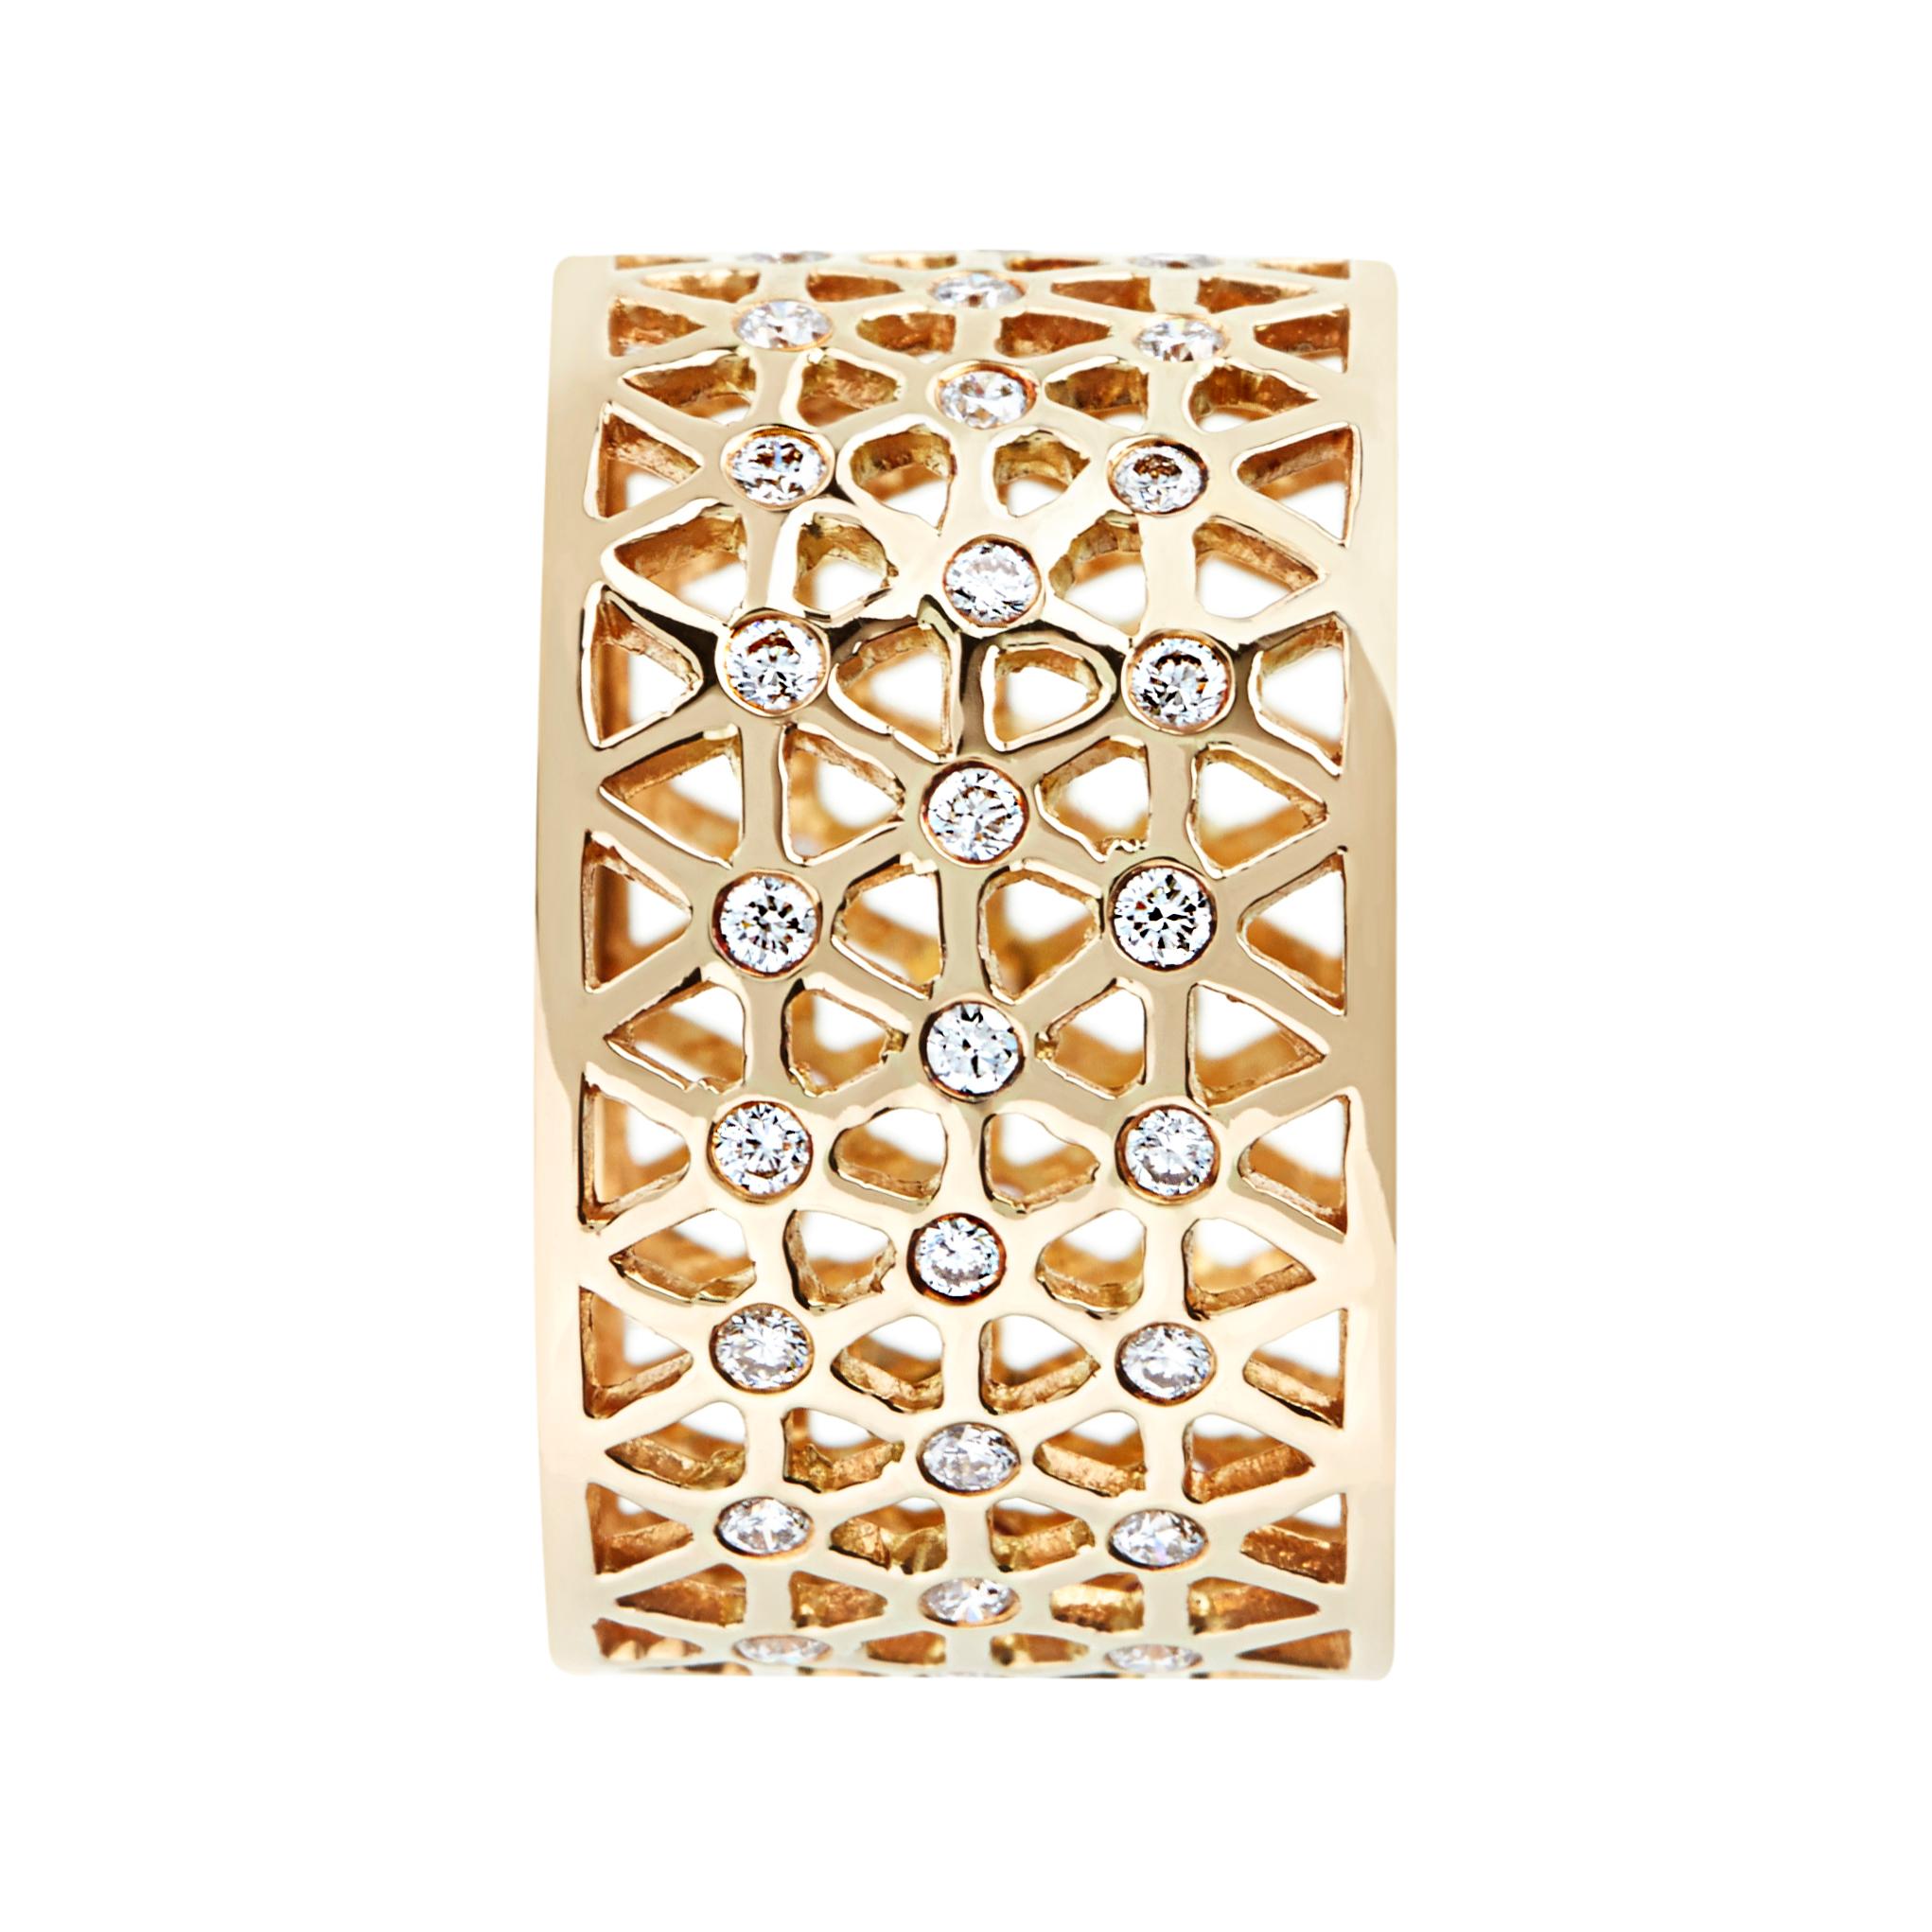 Handcrafted 0.19 Carat Diamonds 18 Karat Yellow Gold Band Ring. Delicate hand pierced band ring adorned with white diamonds. Can be worn both with a casual outfit for an every day look or with a more elegant outfit. Showcasing our designer's